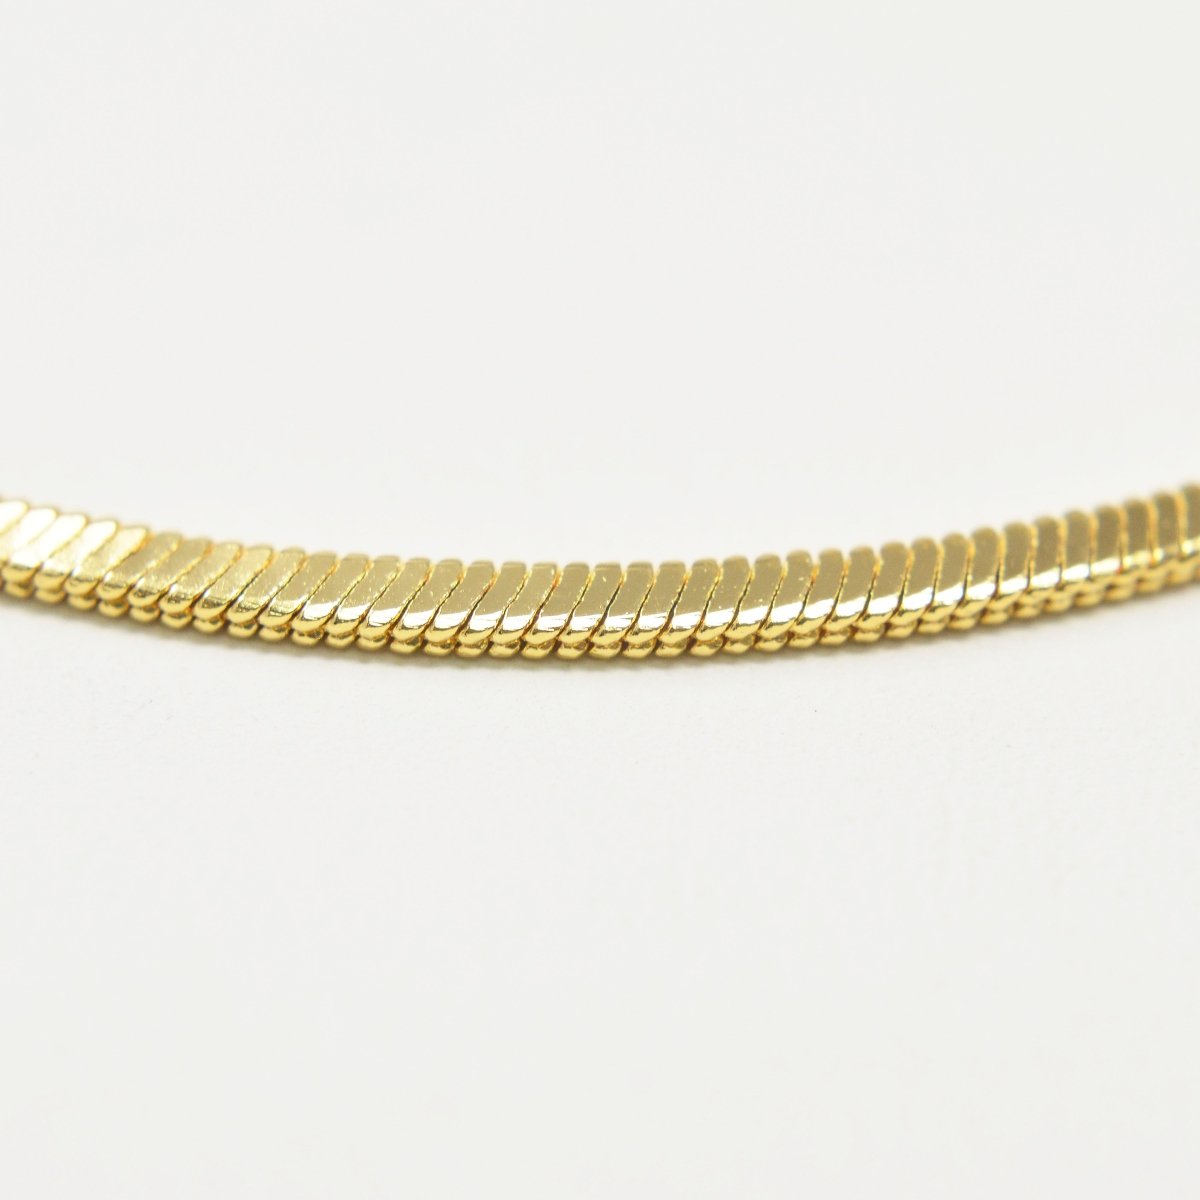 17.7 inch Omega Chain Necklace, 24K Gold Filled Finished Necklace For Jewelry Making, Dainty 1.8mm Omega Necklace w/ Lobster Clasps | CN-985 Clearance Pricing - DLUXCA